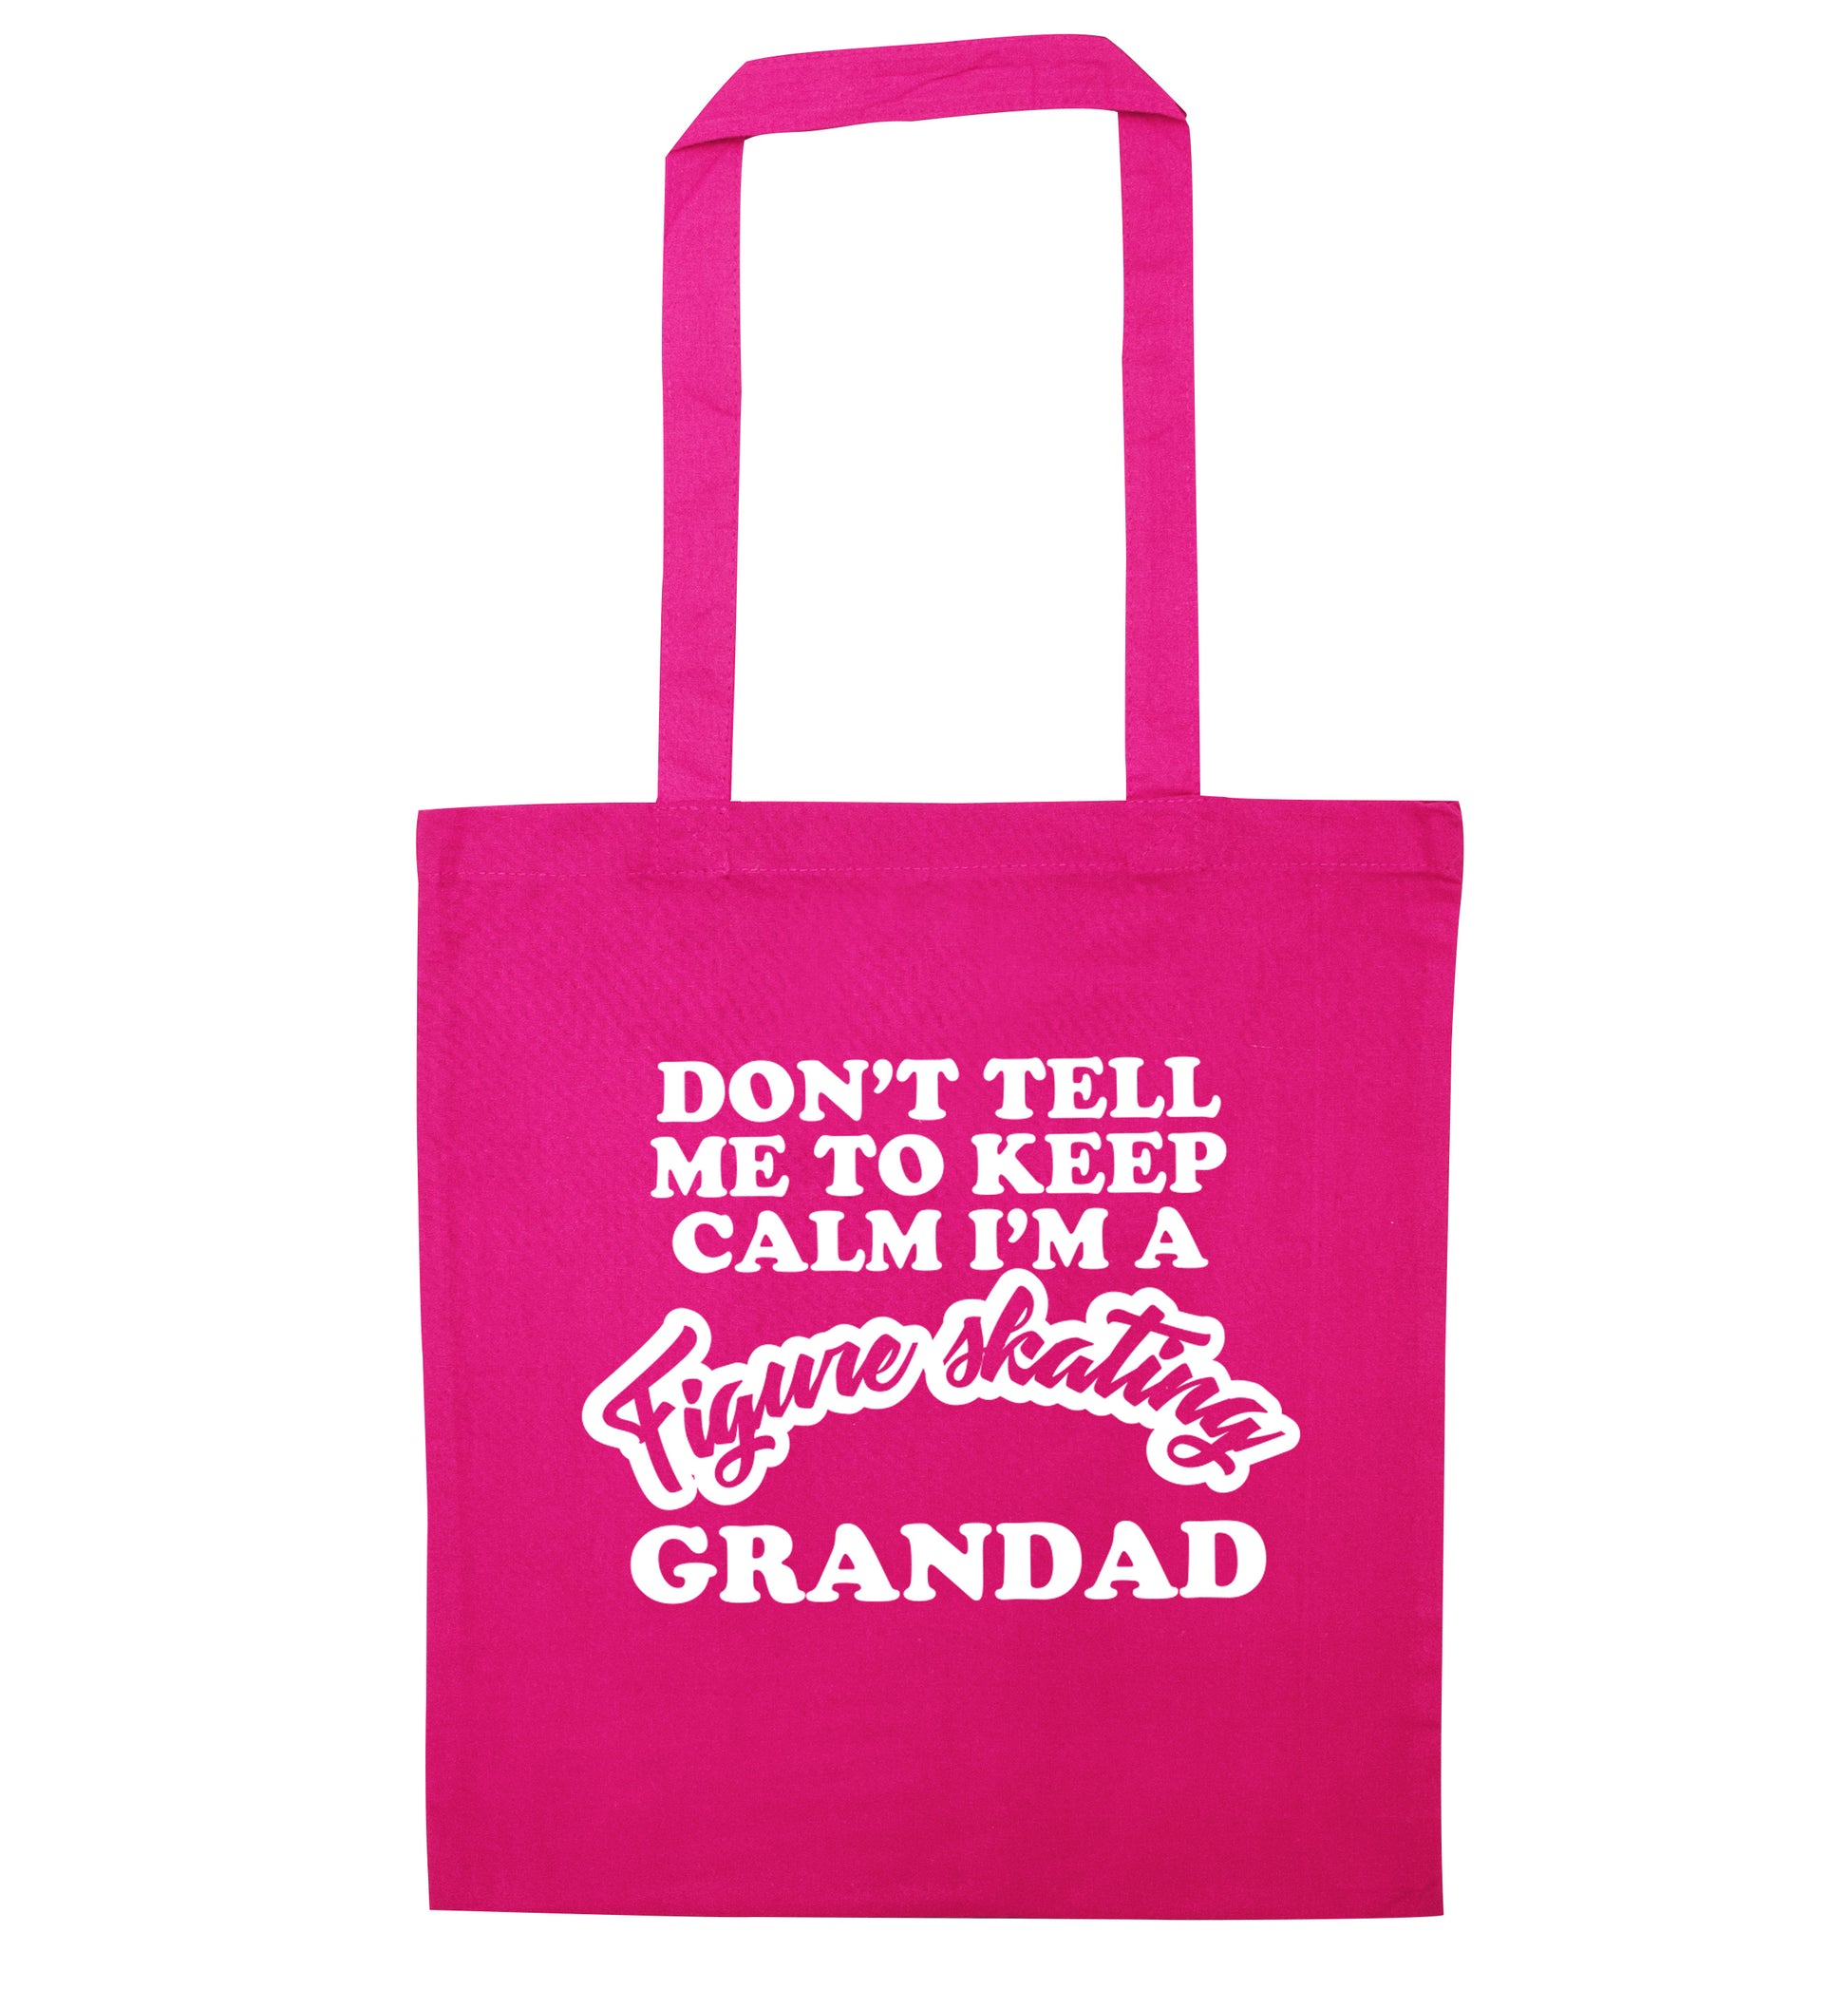 Don't tell me to keep calm I'm a figure skating grandad pink tote bag